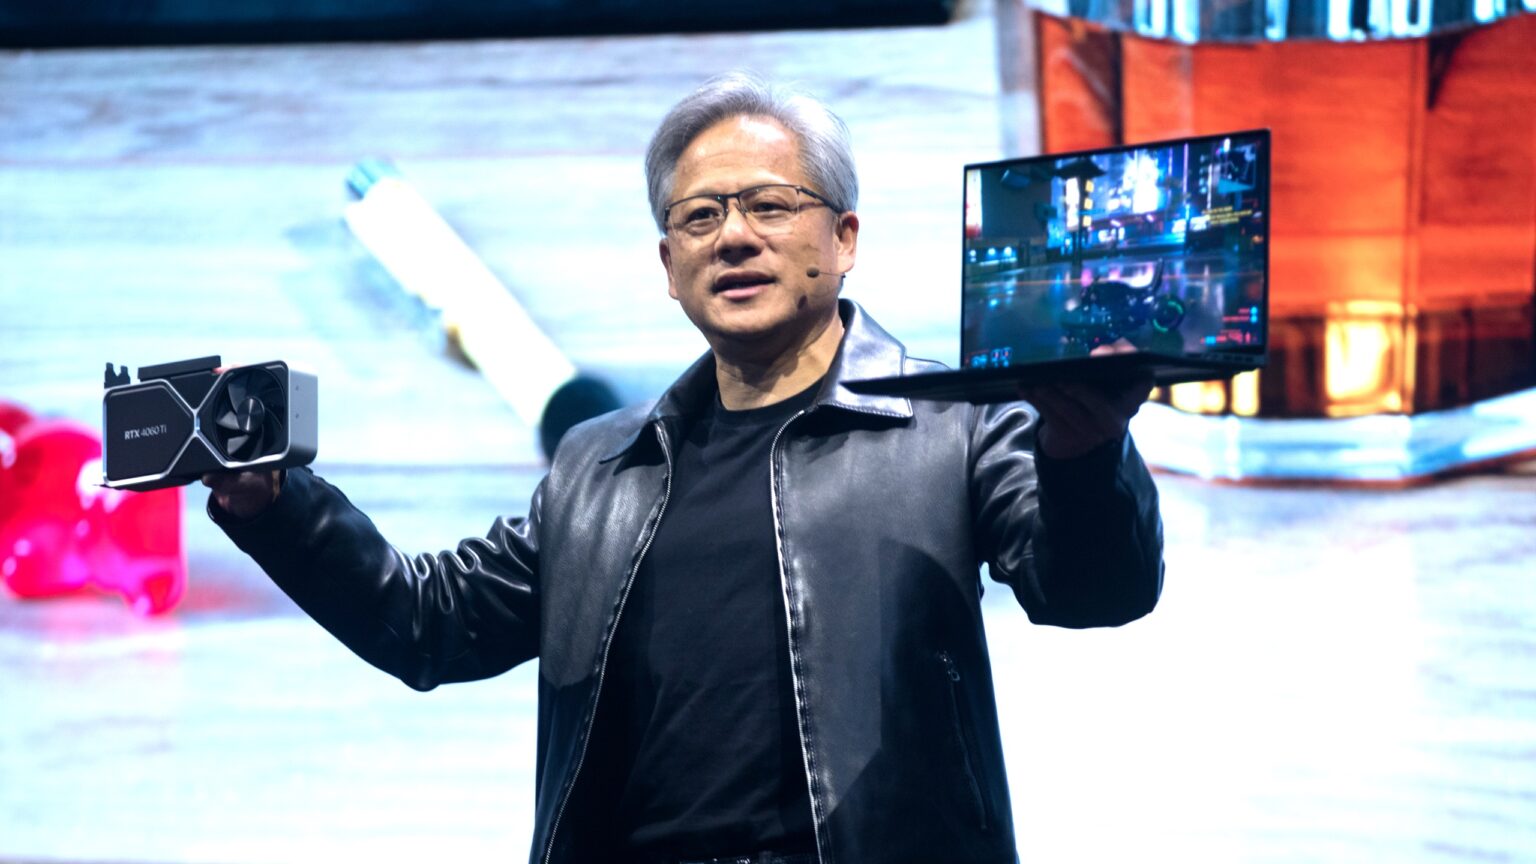 Nvidia's Q2 Sales Skyrocket by 171% to $13.51 Billion, Defying Expectations